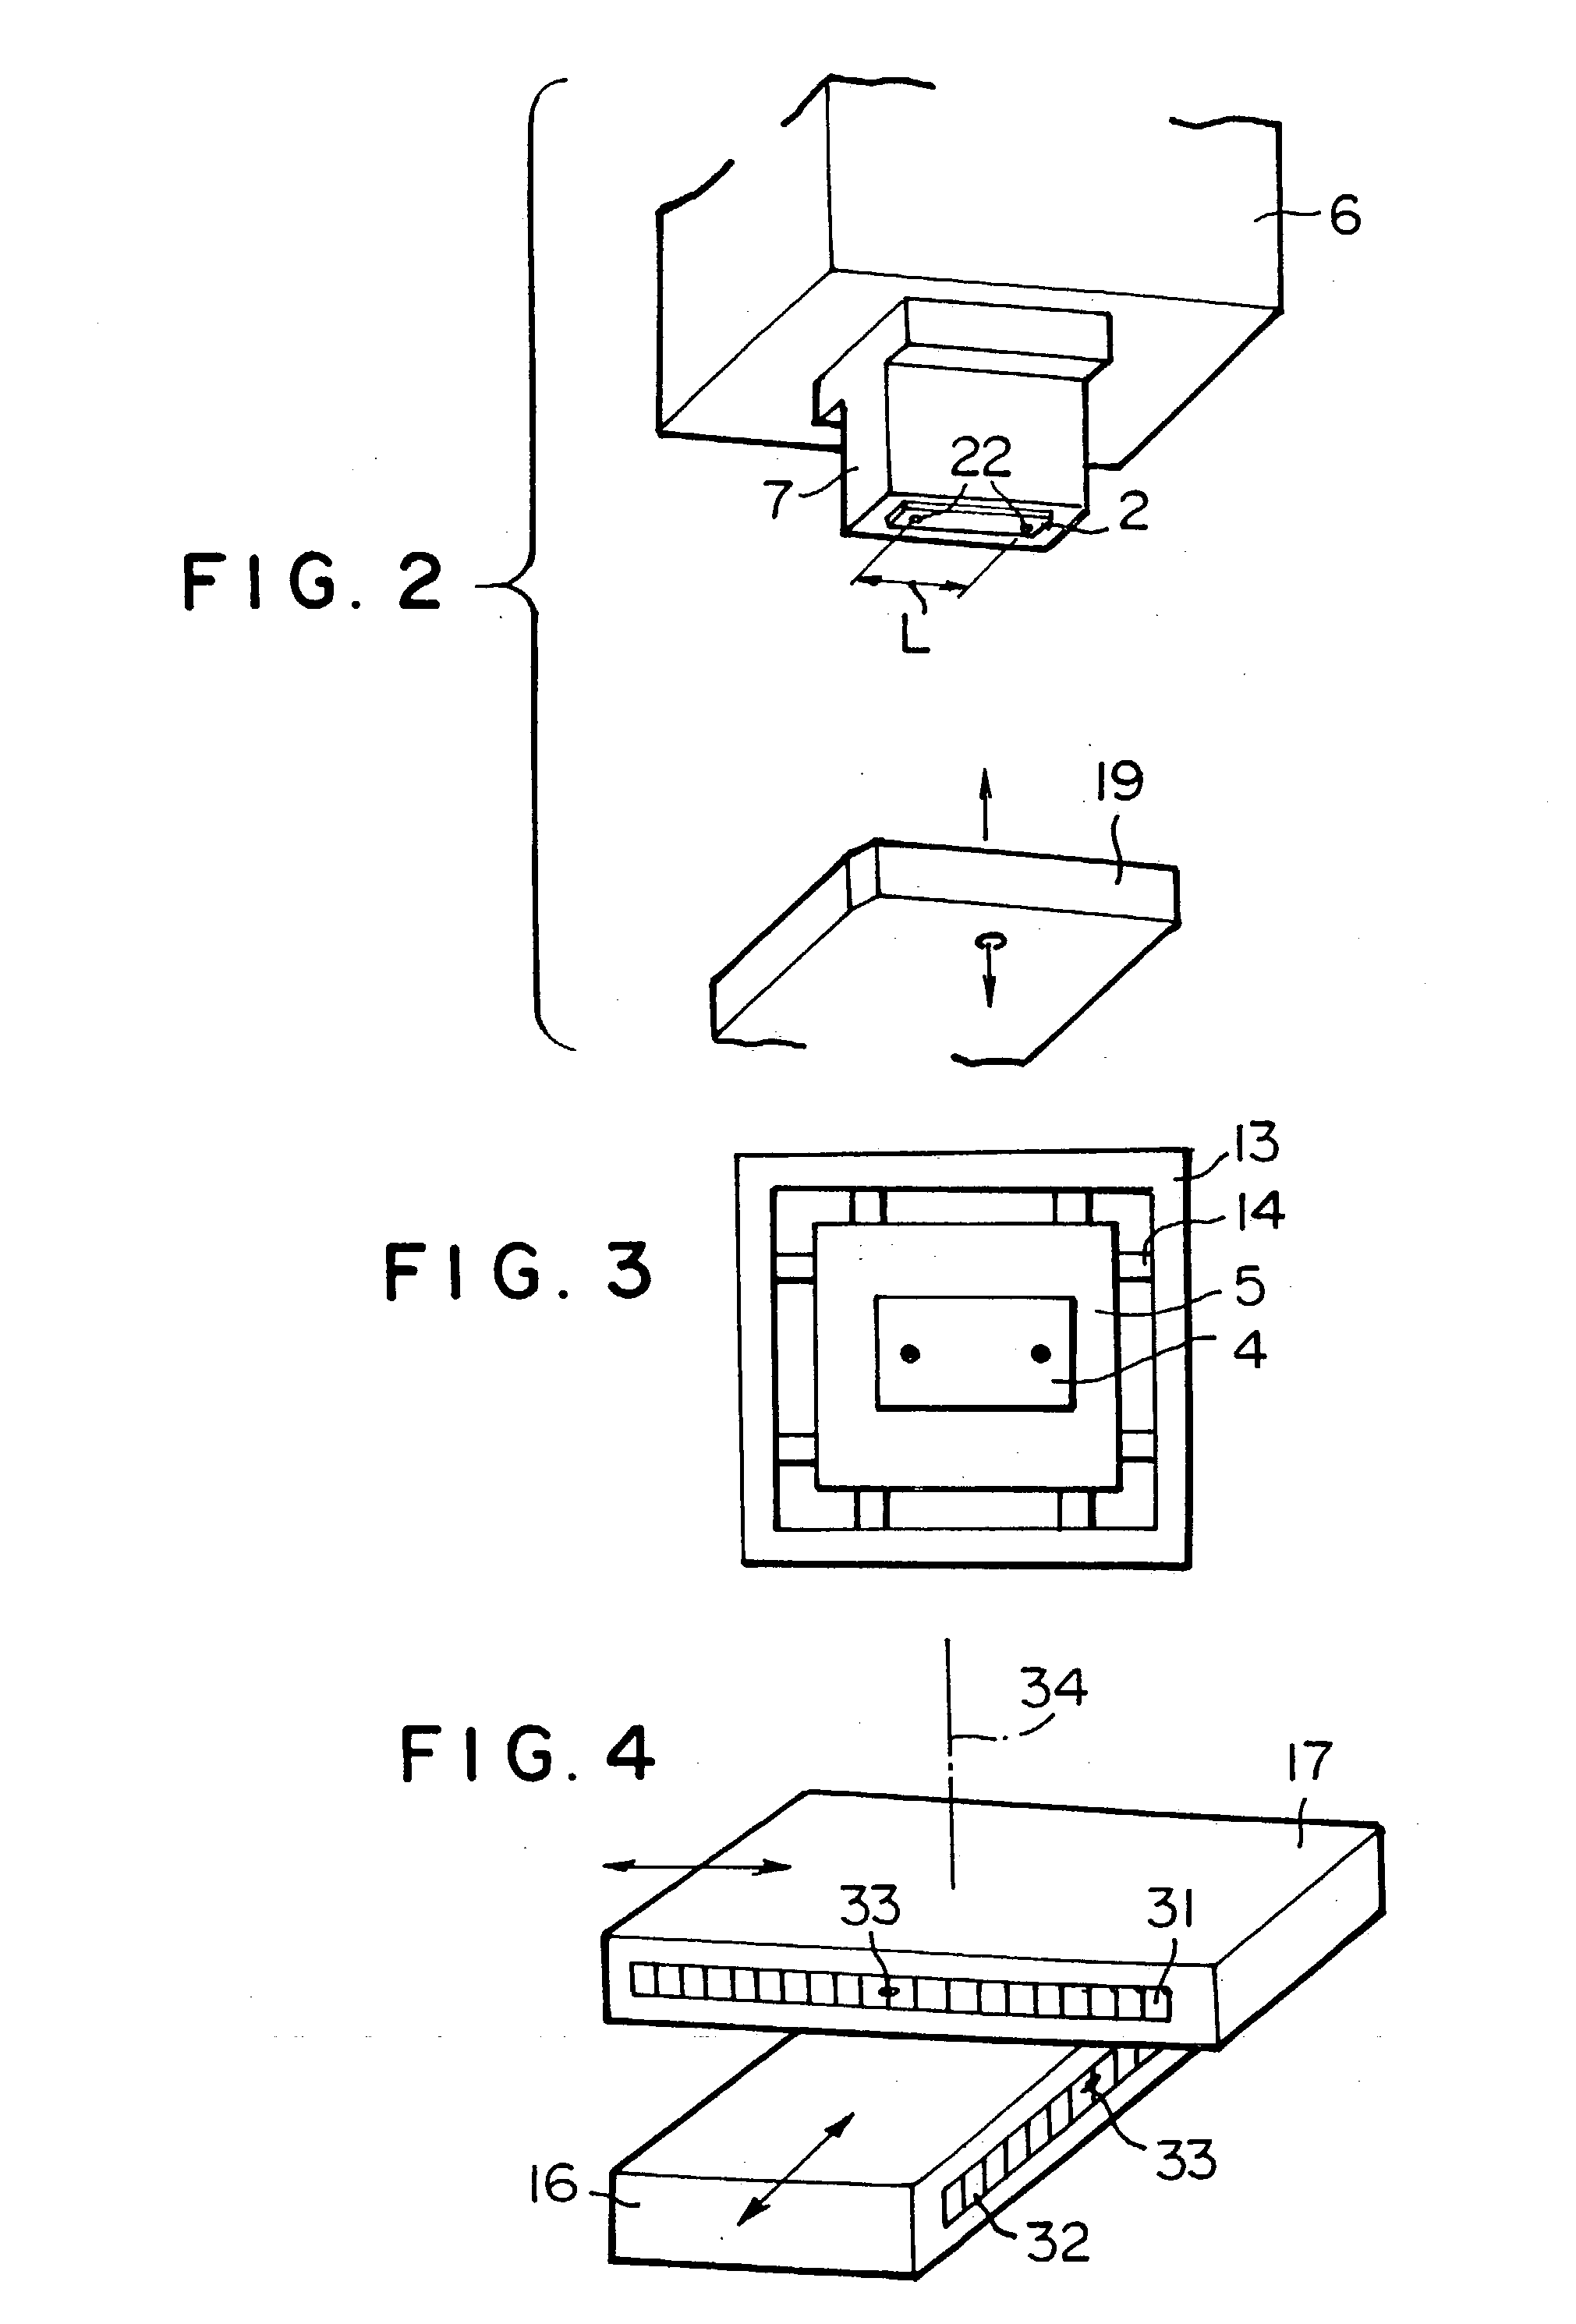 Chip-mounting device and method of alignment